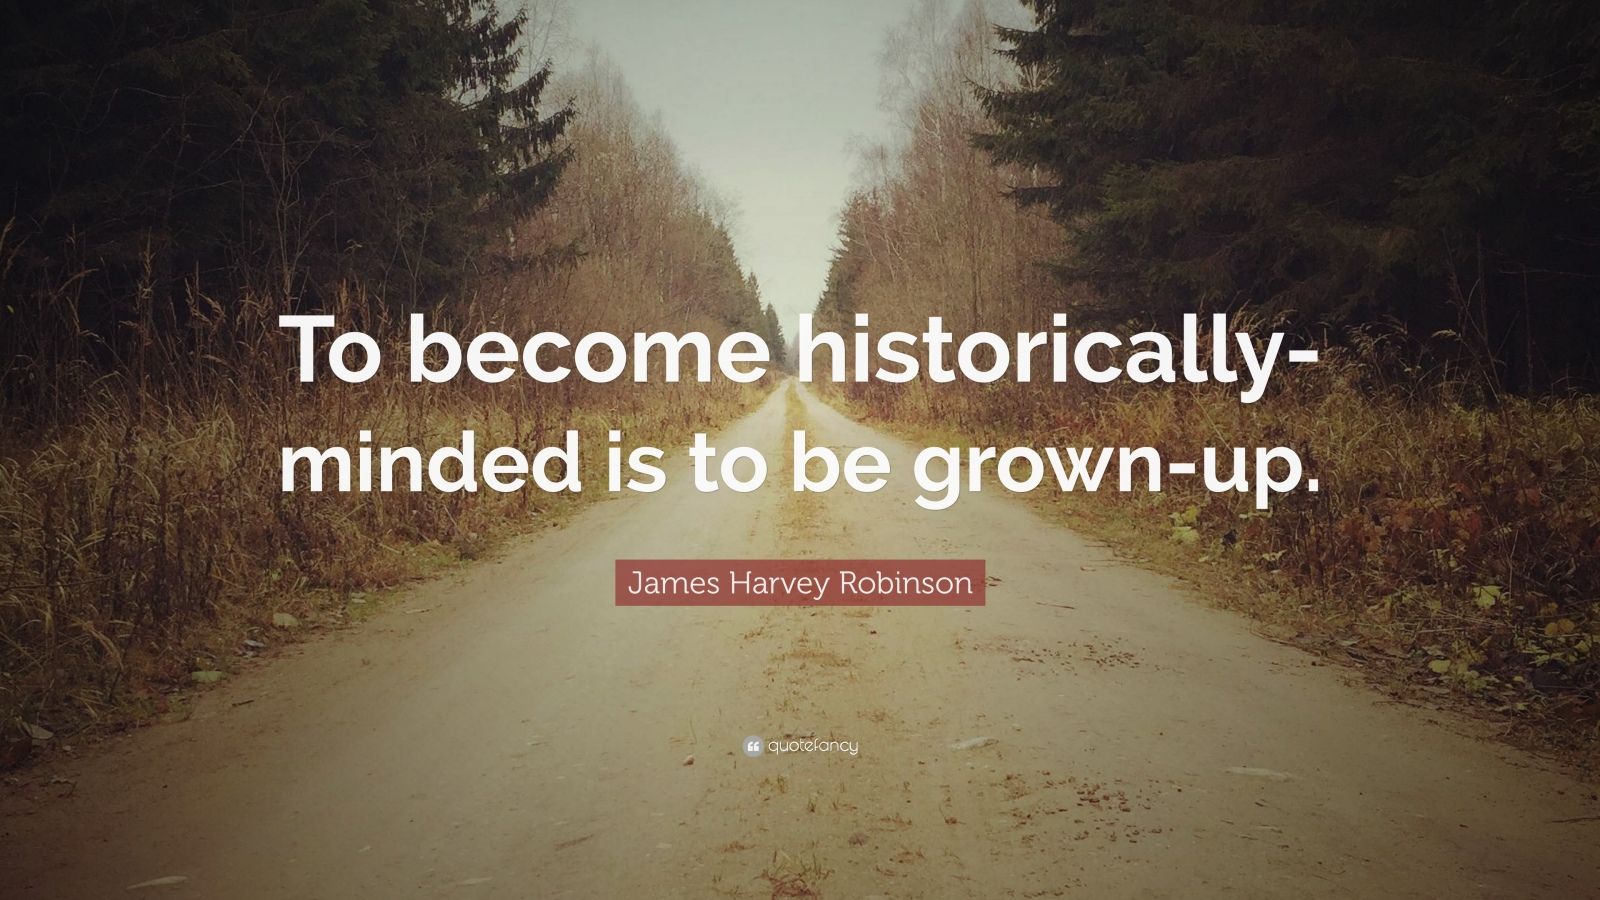 Top 15 James Harvey Robinson Quotes | 2021 Edition | Free Images - QuoteFancy